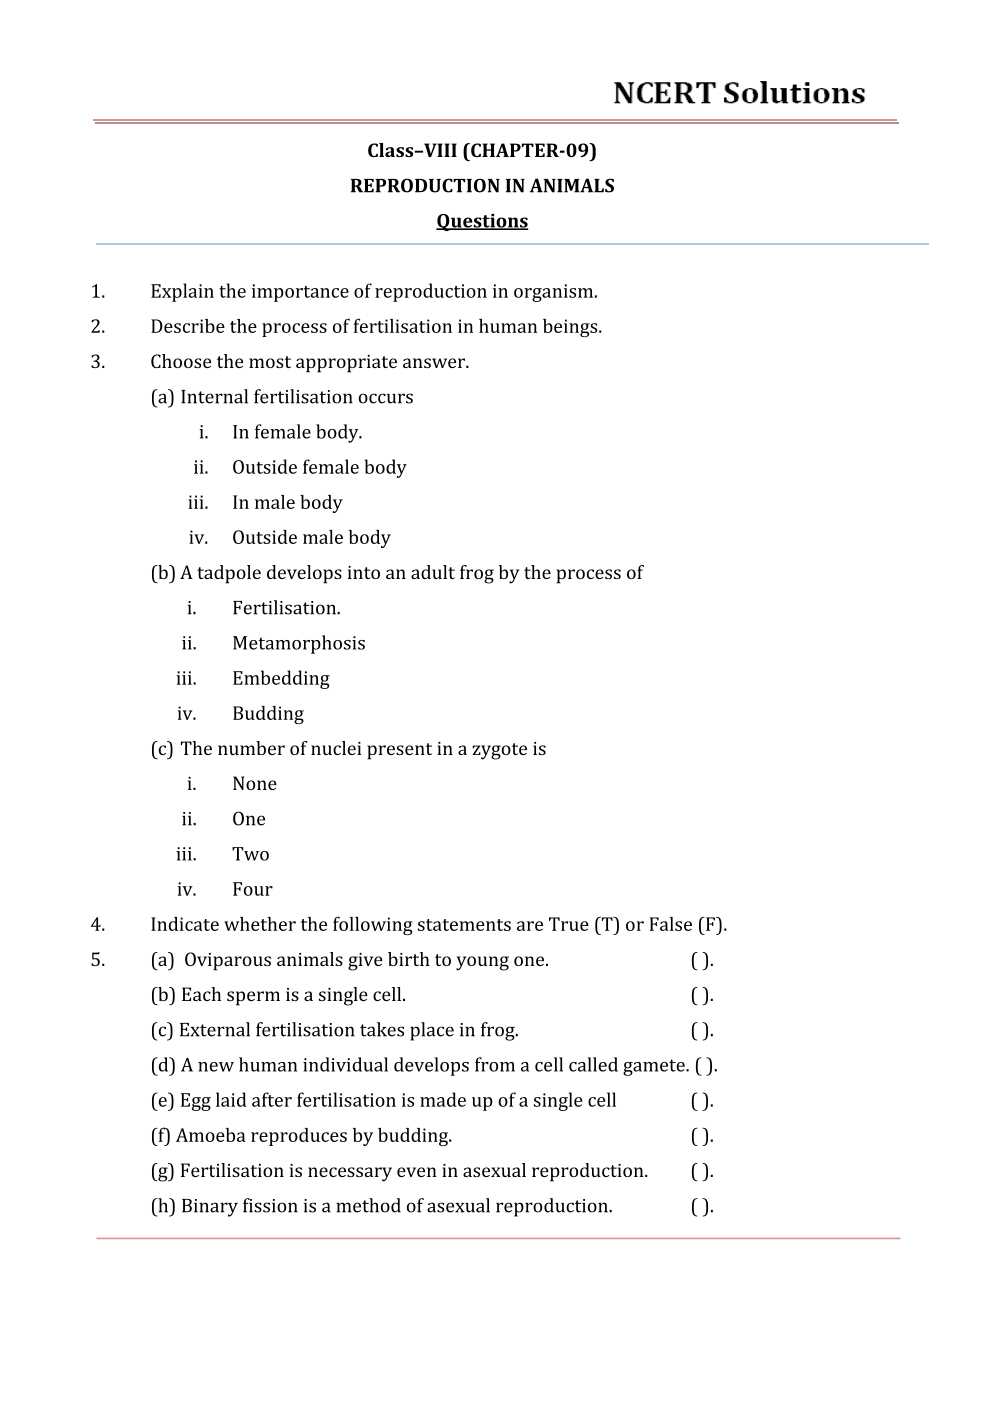 NCERT Solution for Class 8 Science Chapter 9 Reproduction in Animals